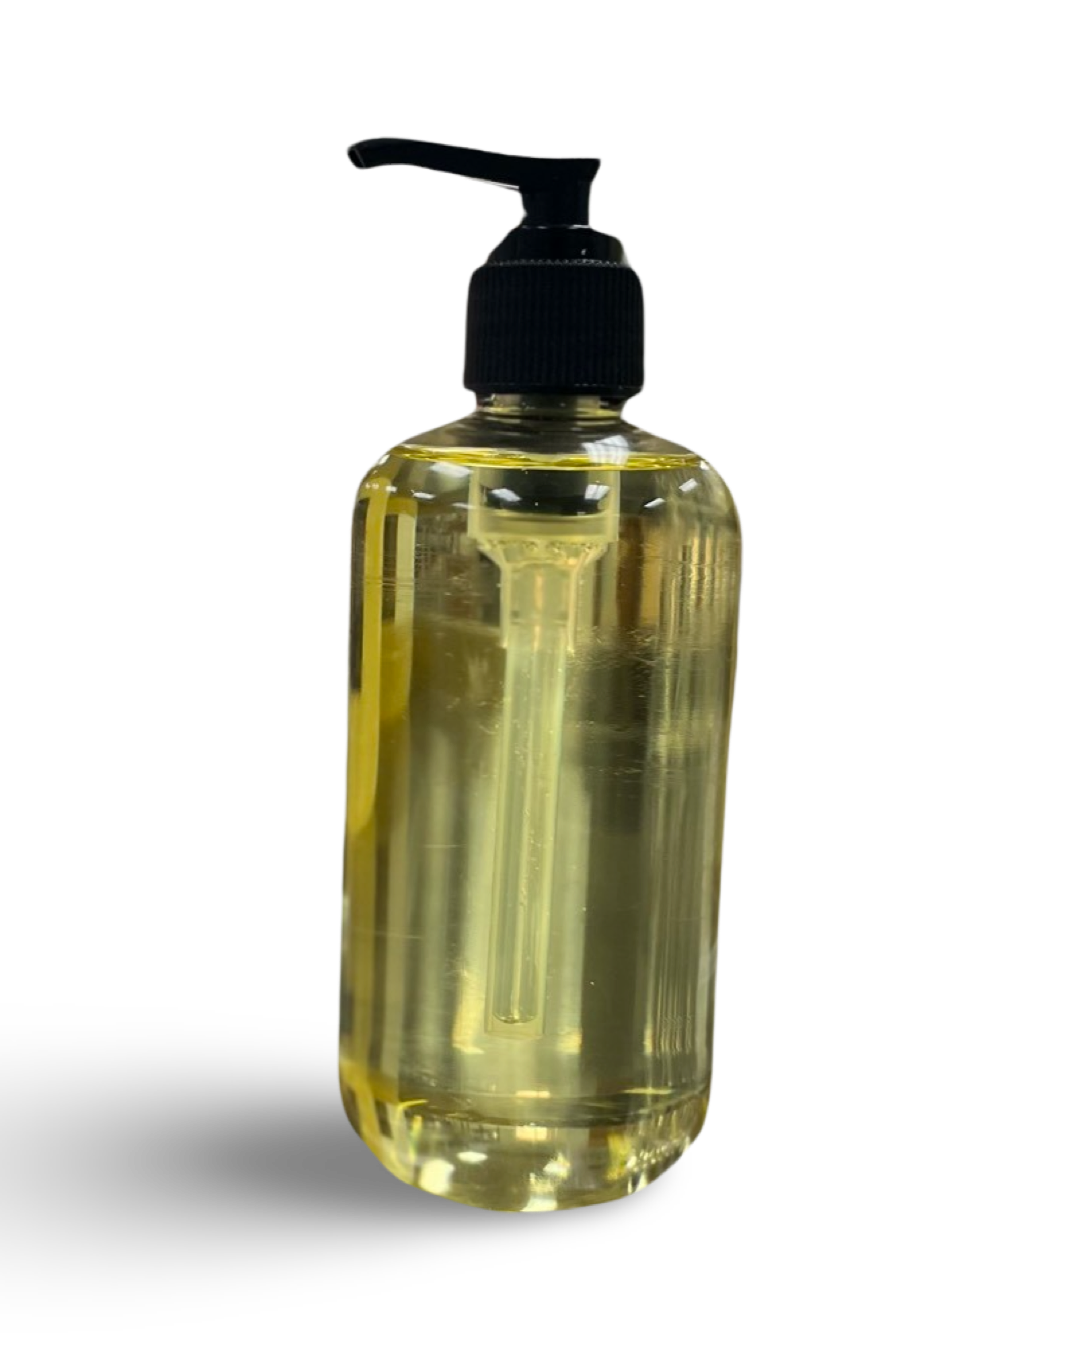 Aromatherapy Body Oil Rosemary and Ginger